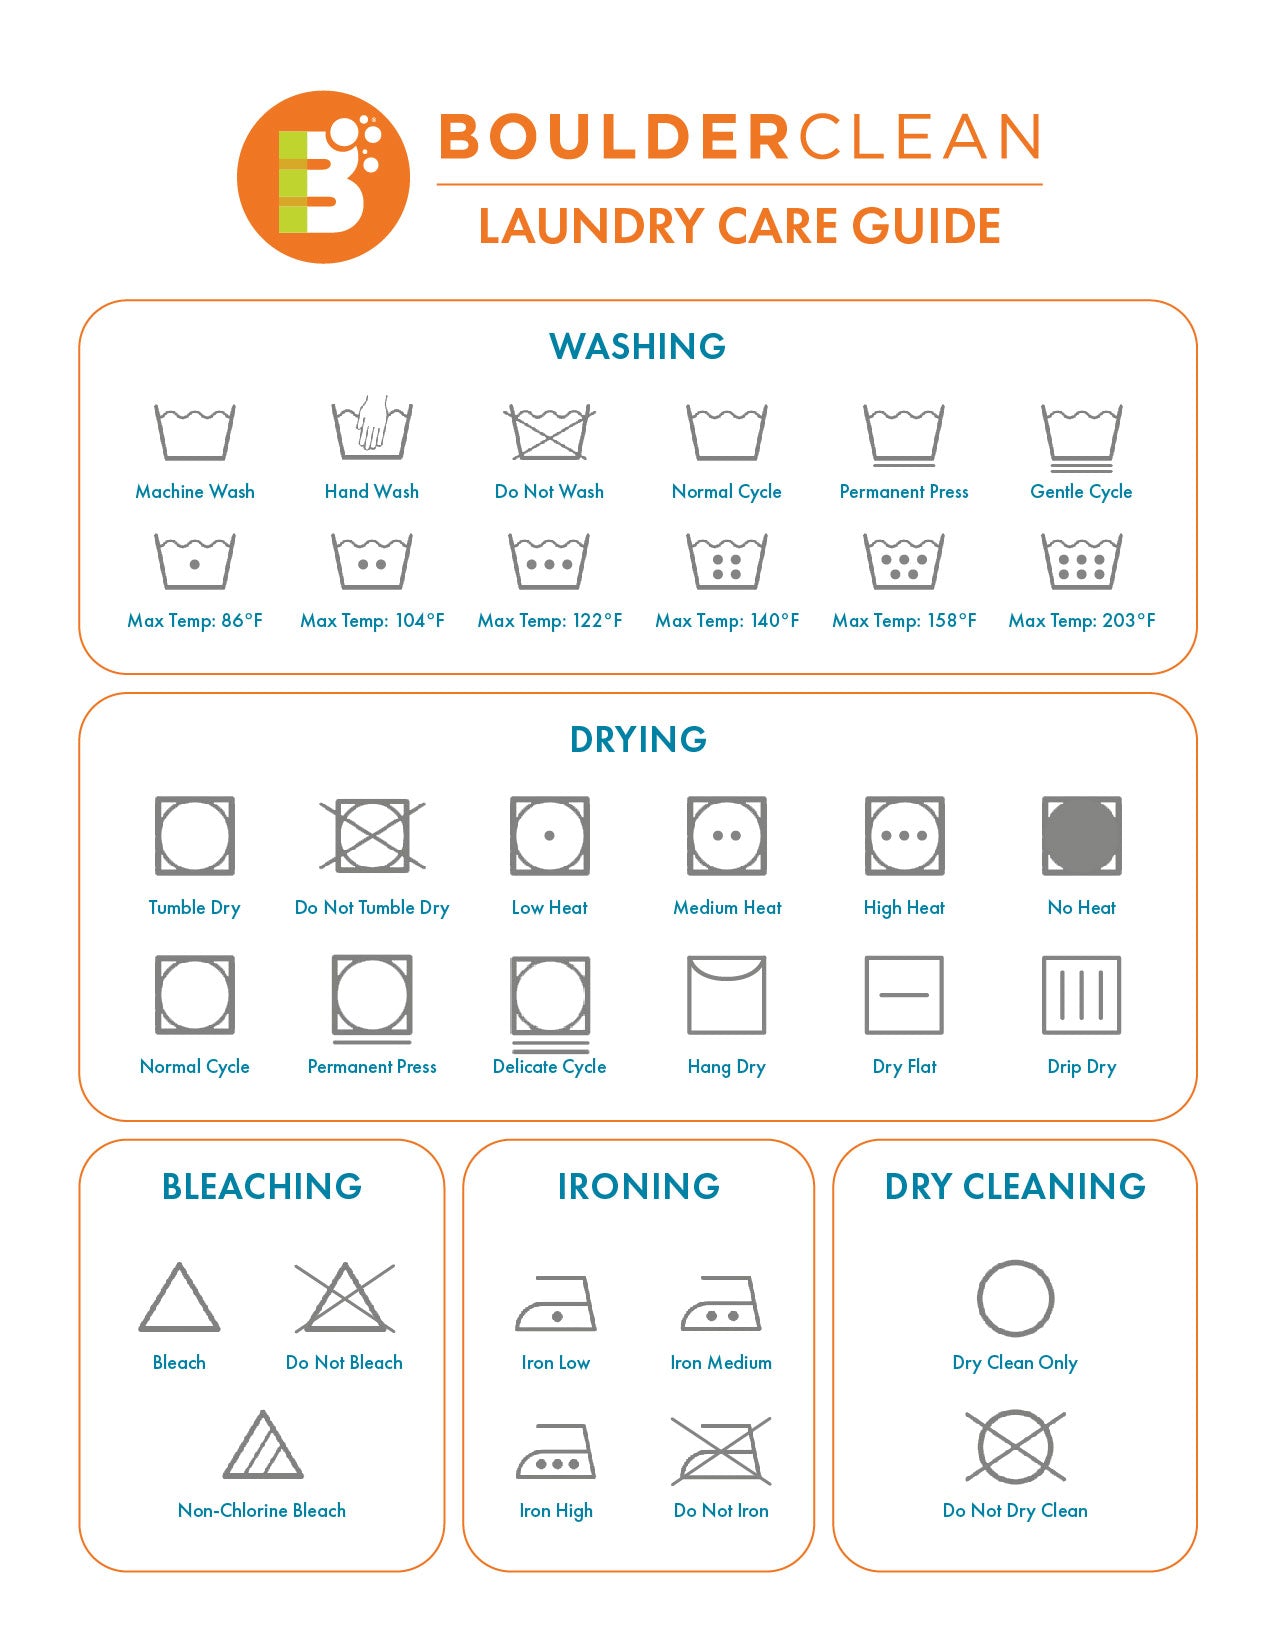 A Guide Laundry Symbols and | Boulder Clean